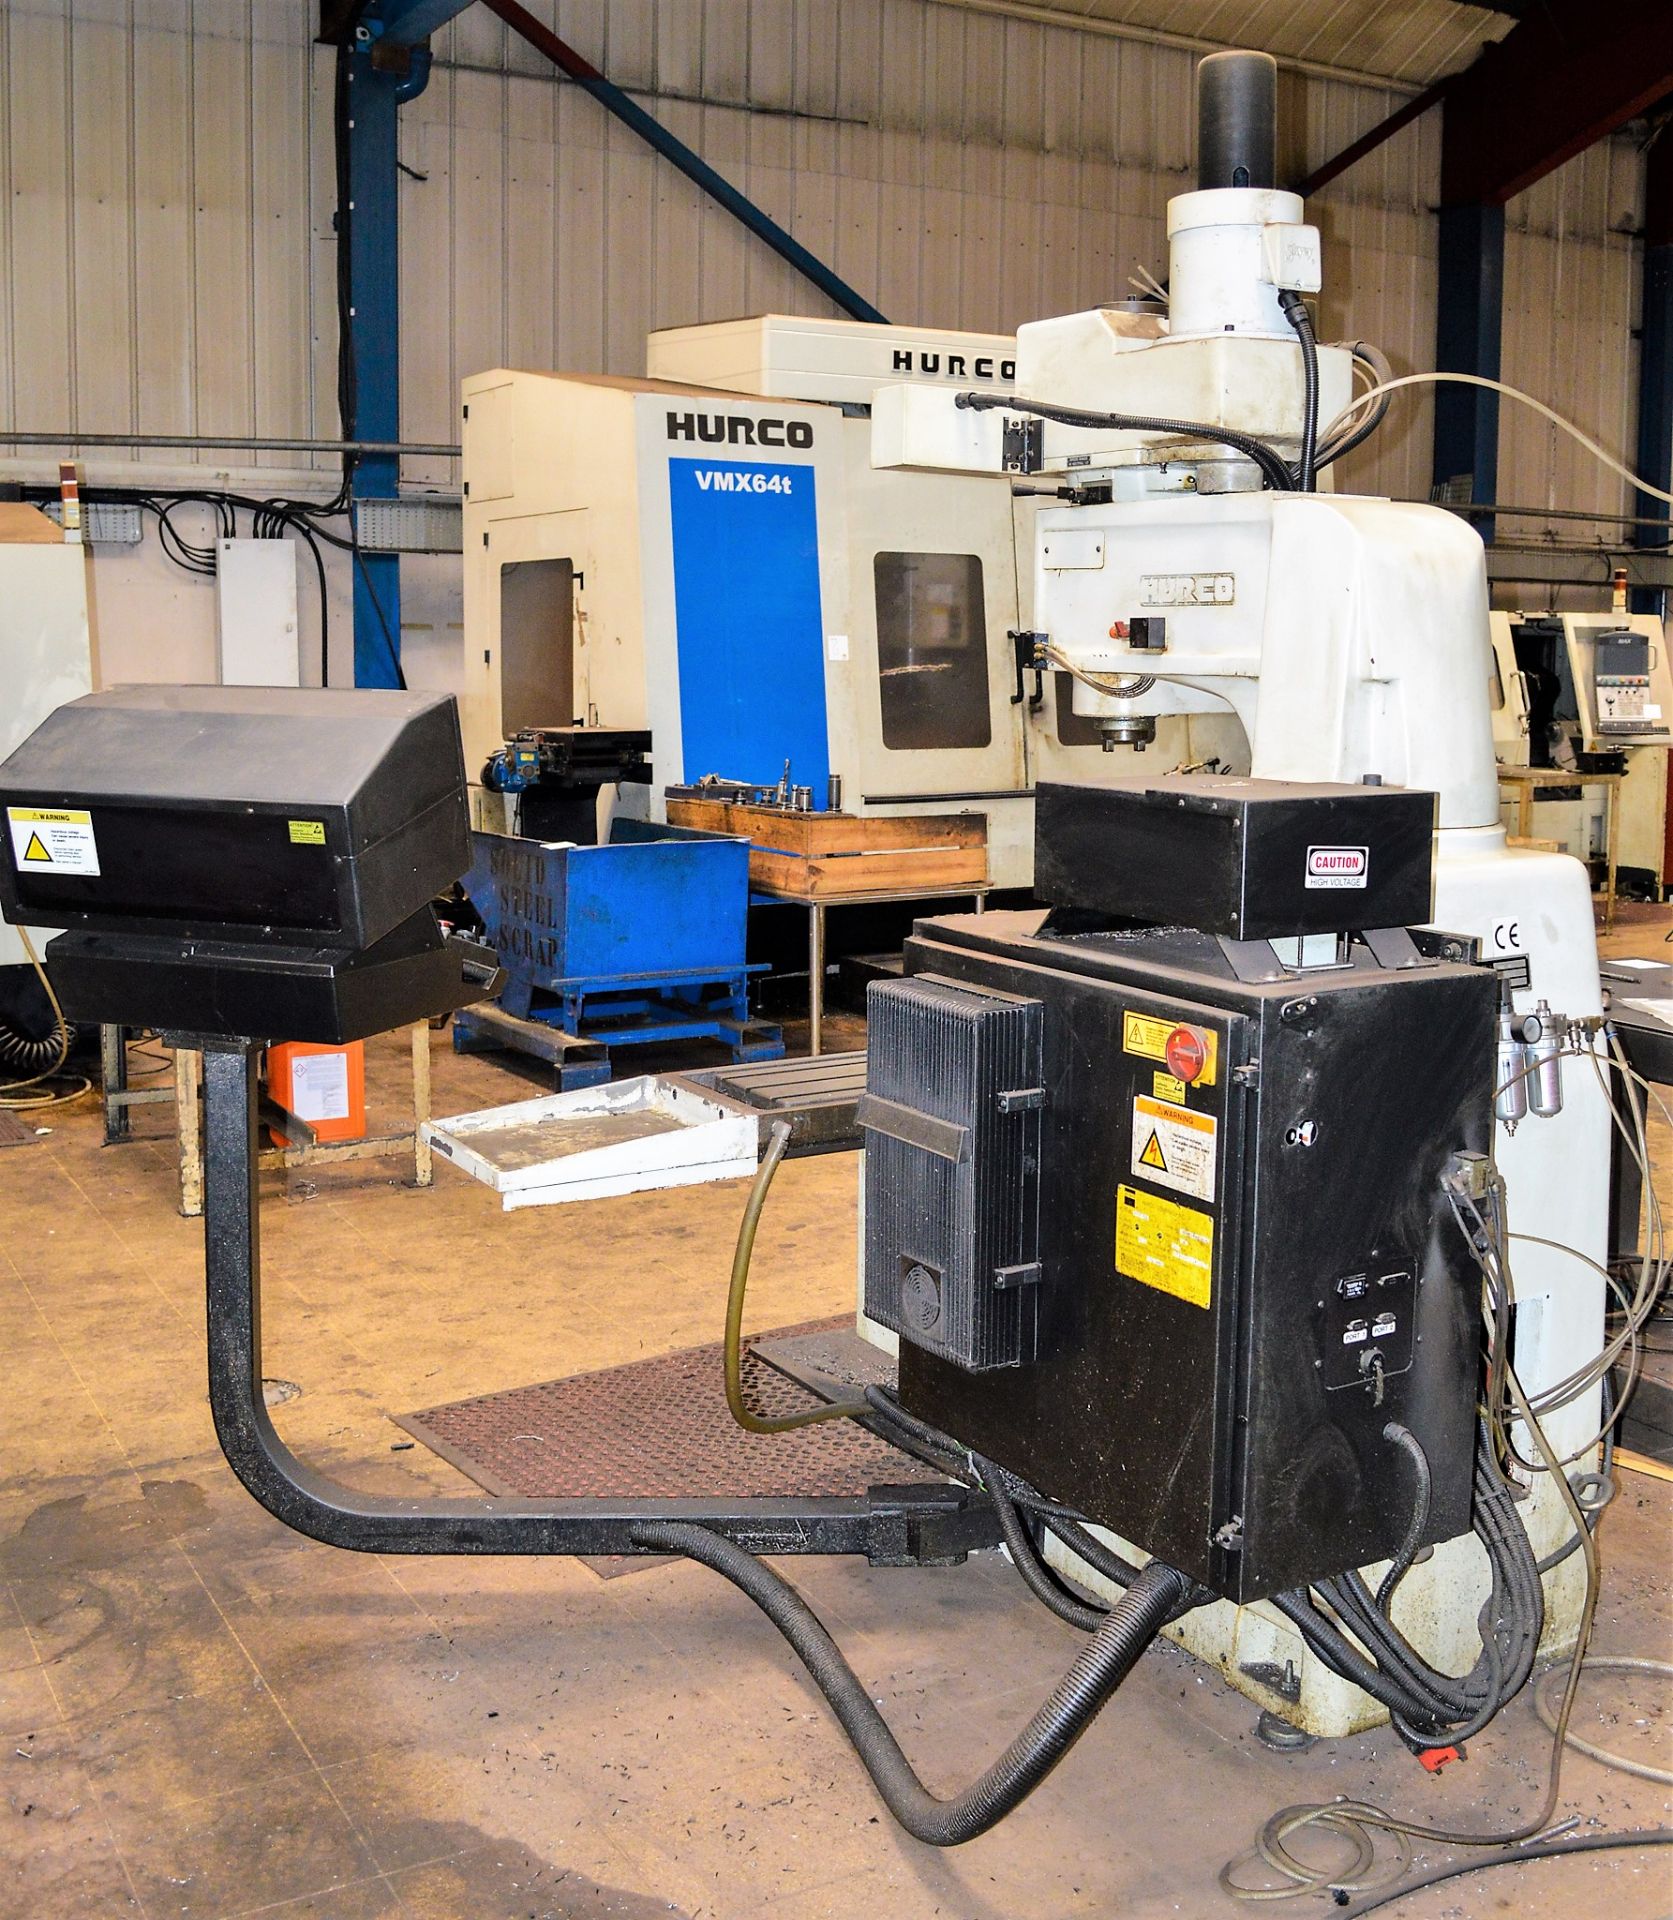 Hurco Hawk 5M CNC vertical milling machine Year: 1995 S/N: 9500432 c/w 36 inch x 12 inch table & - Image 4 of 5